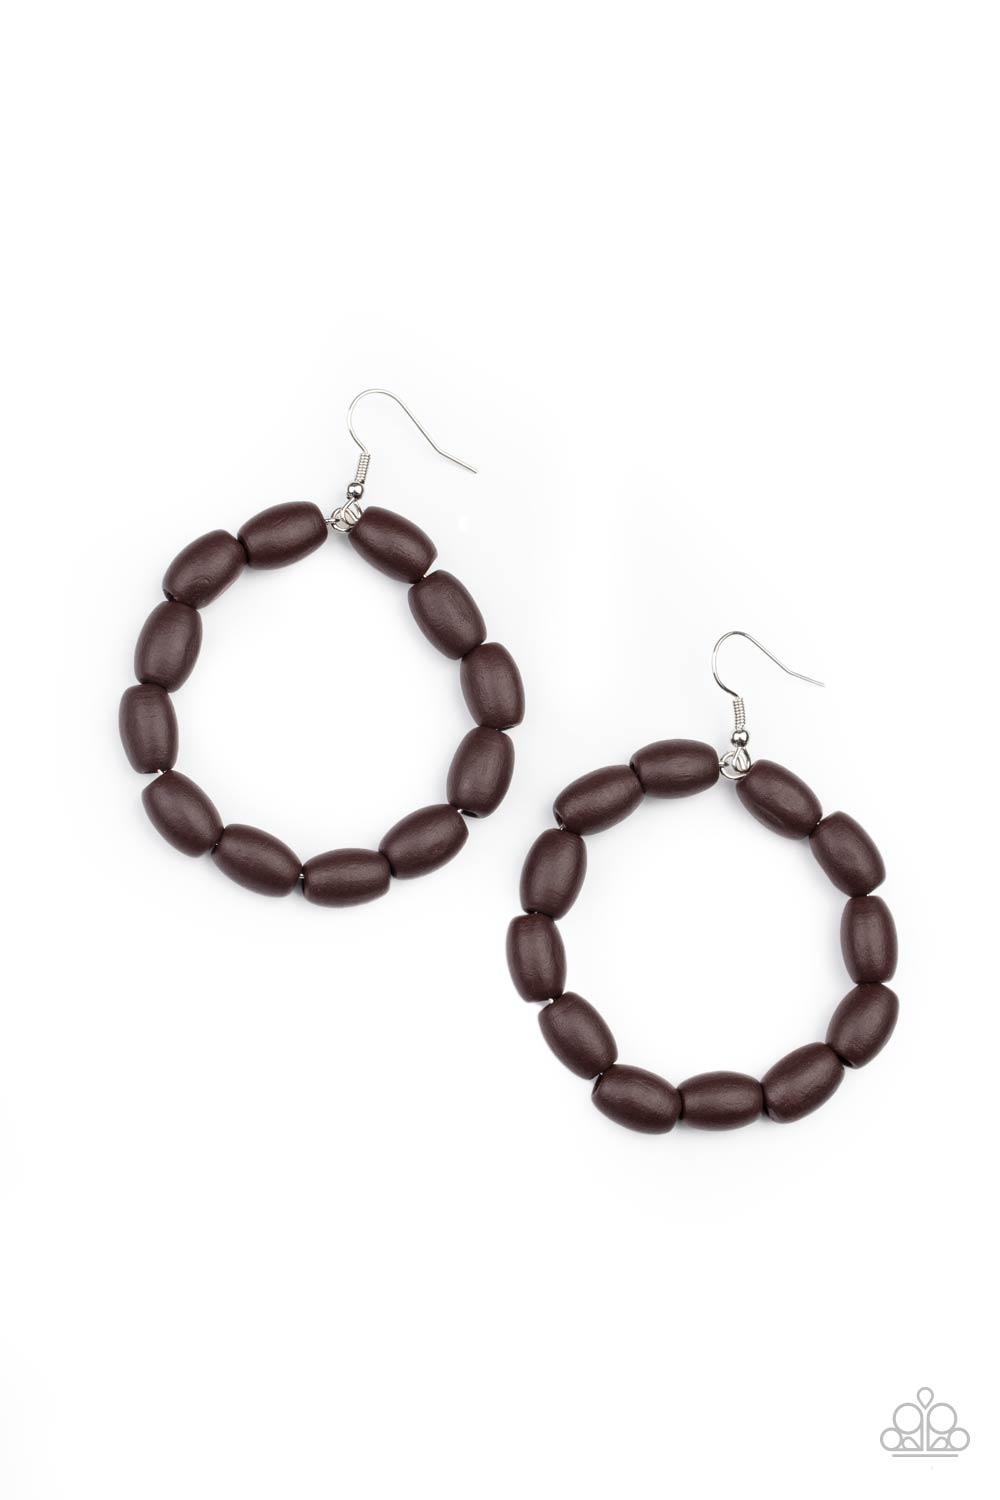 Paparazzi Accessories Living The WOOD Life - Brown Chunky brown wooden beads are threaded along a dainty wire, creating an earthy hoop. Earring attaches to a standard fishhook fitting. Sold as one pair of earrings. Jewelry